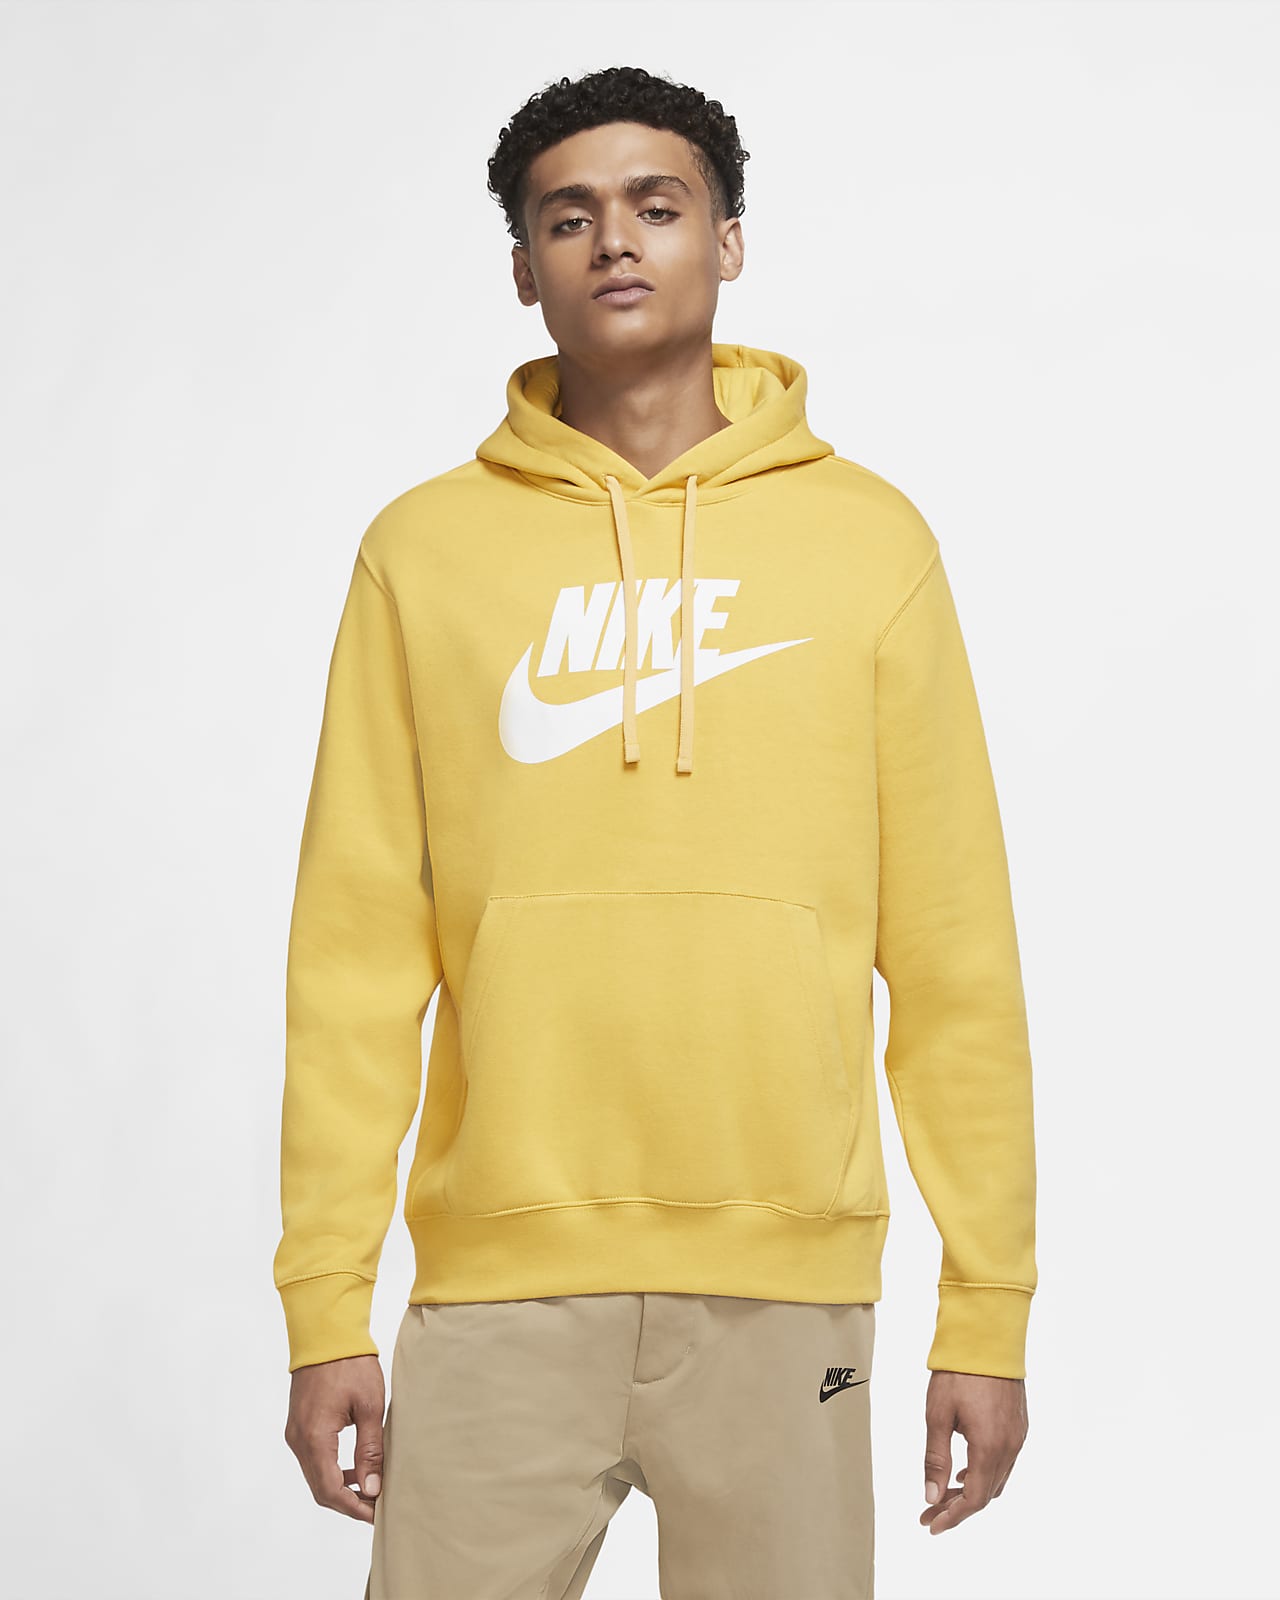 Parity Nike Sweater Men Up To 68 Off [ 1600 x 1280 Pixel ]